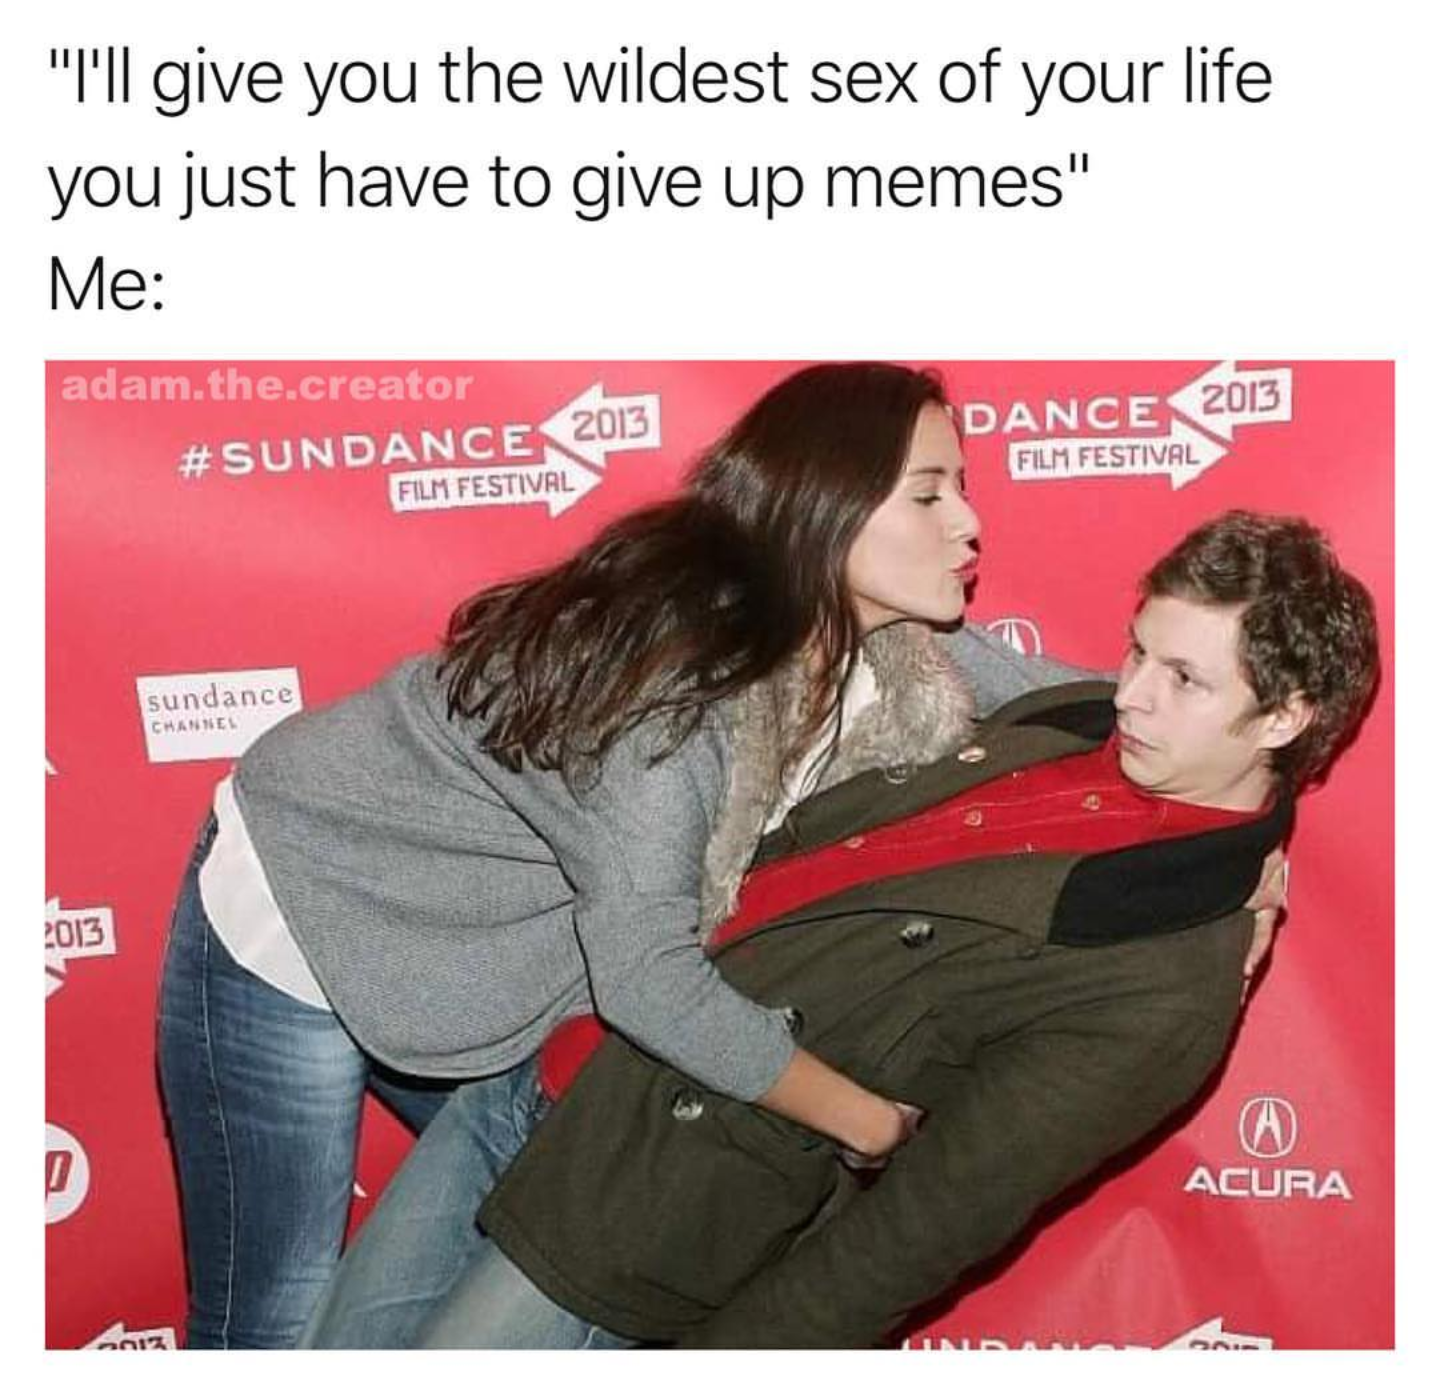 michael cera kiss meme - "I'll give you the wildest sex of your life you just have to give up memes" Me adam.the.creator 2013 Film Festival Dance 2013 Film Festival Sundance 2013 Acura